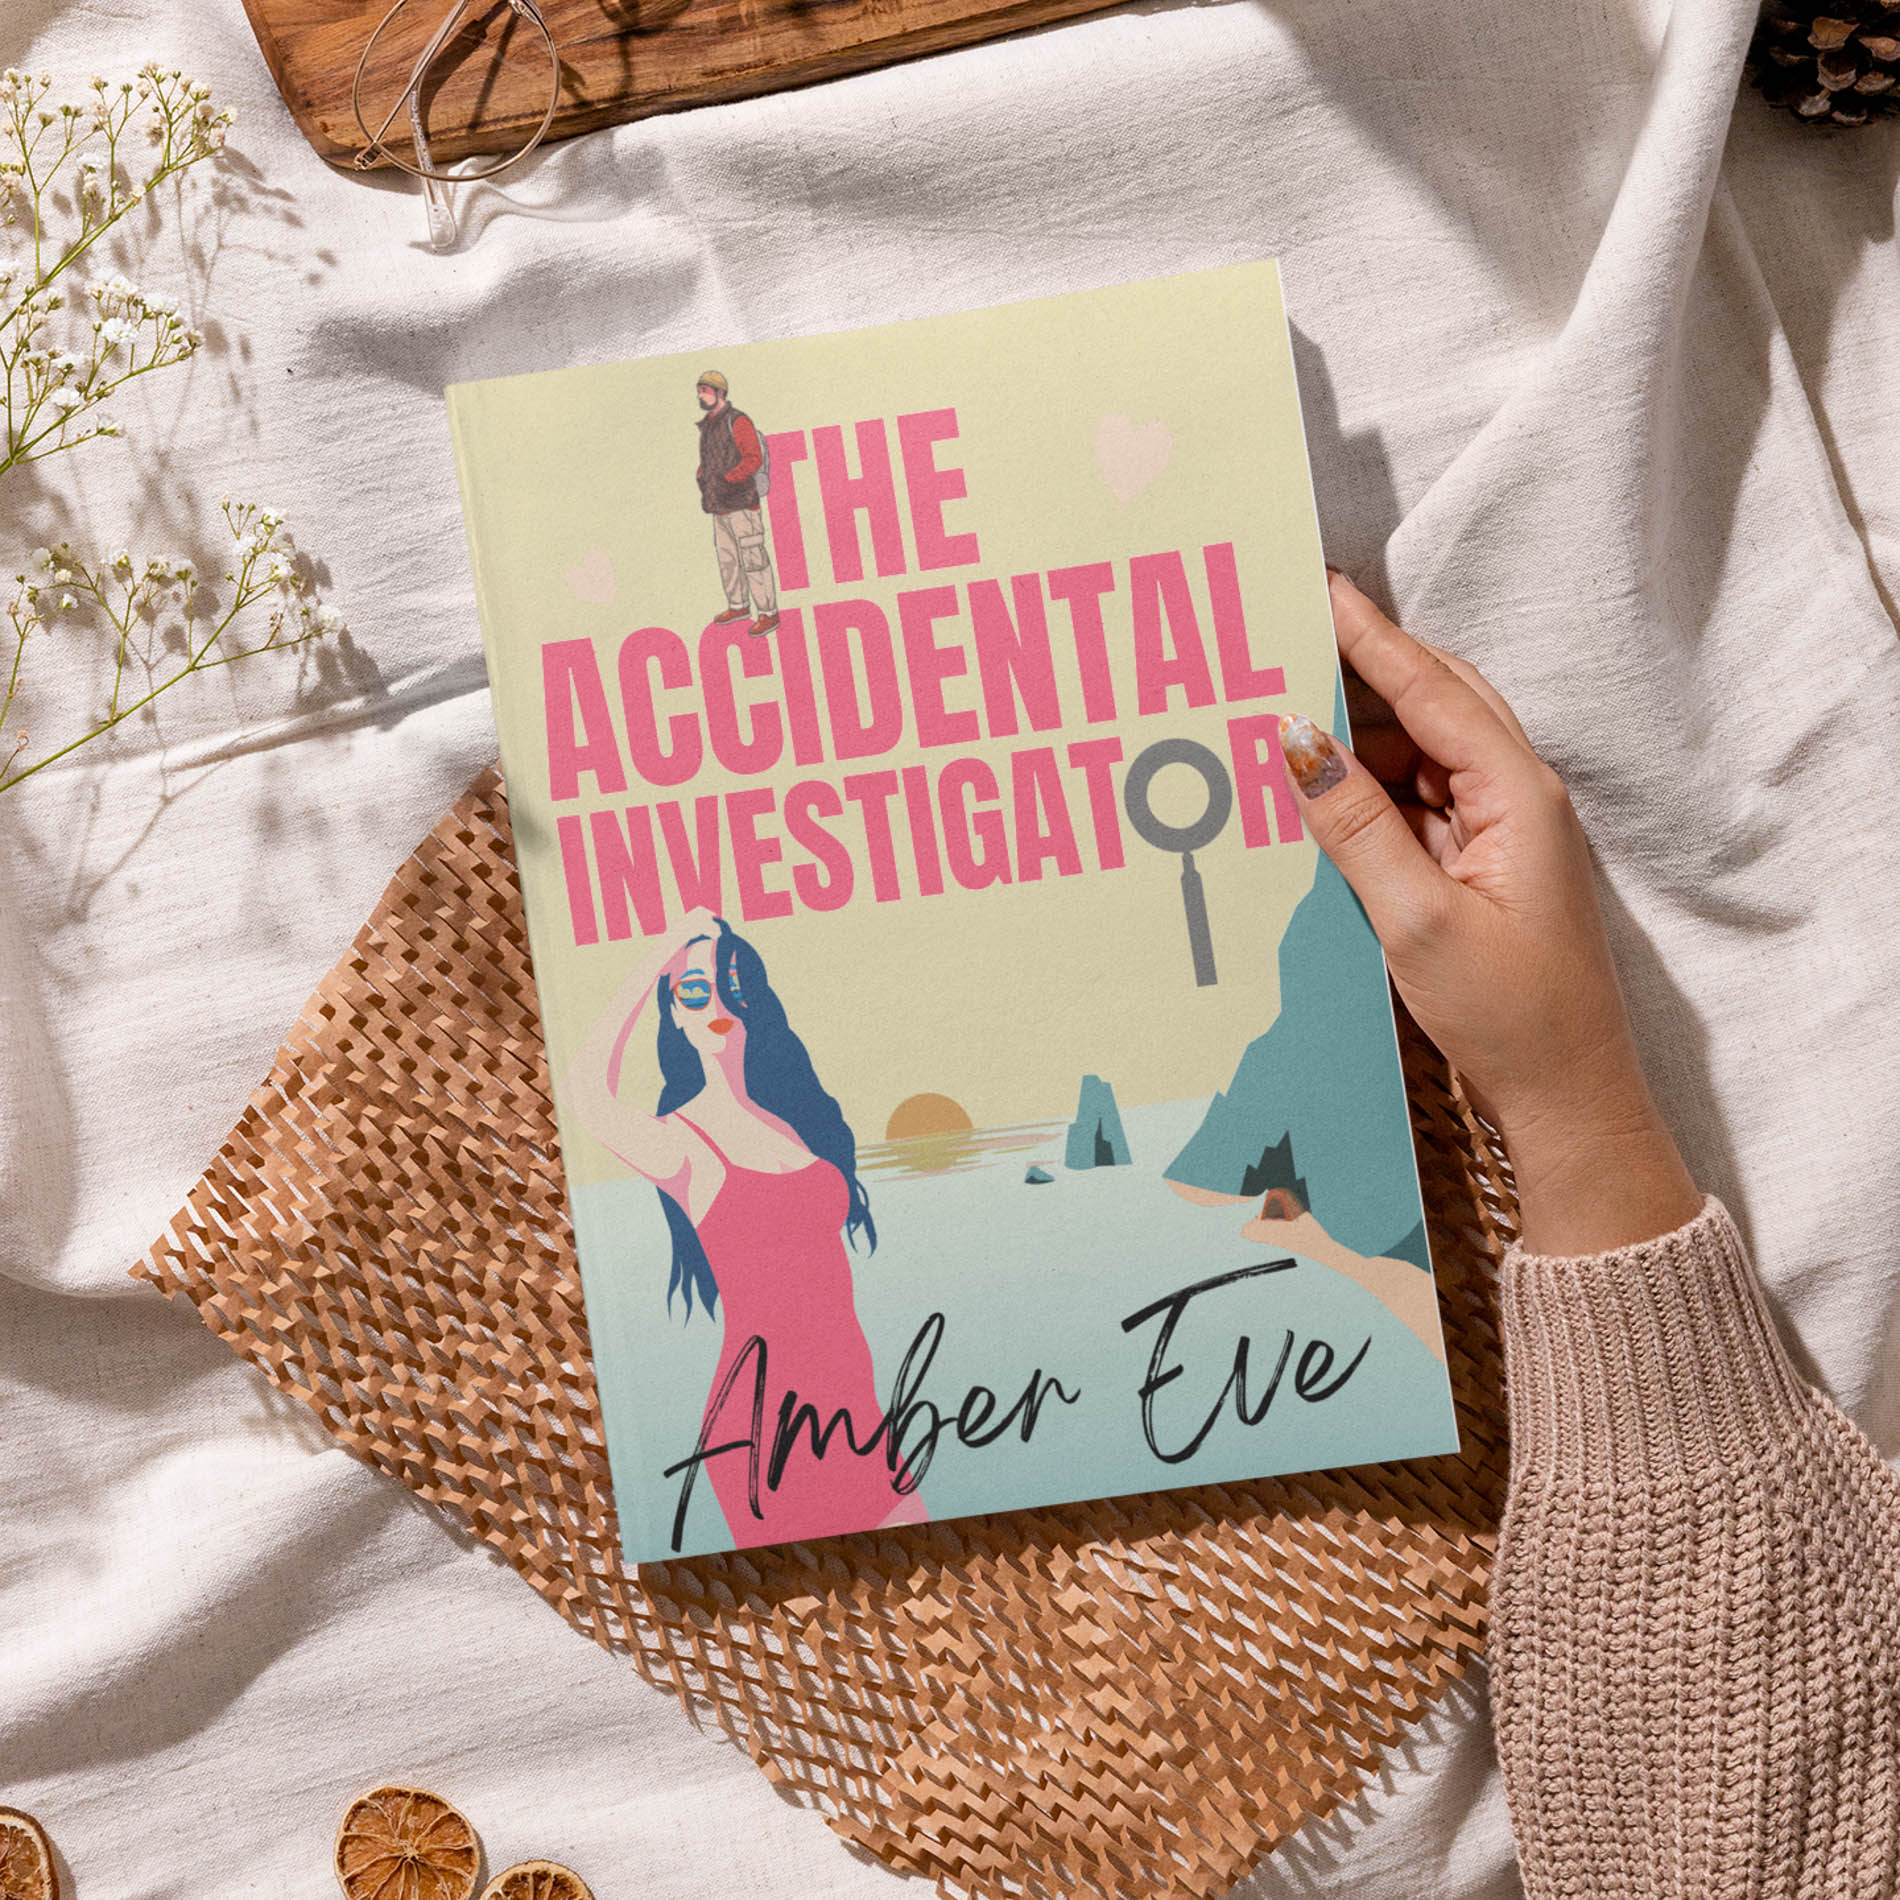 The Accidental Investigator by Amber Eve